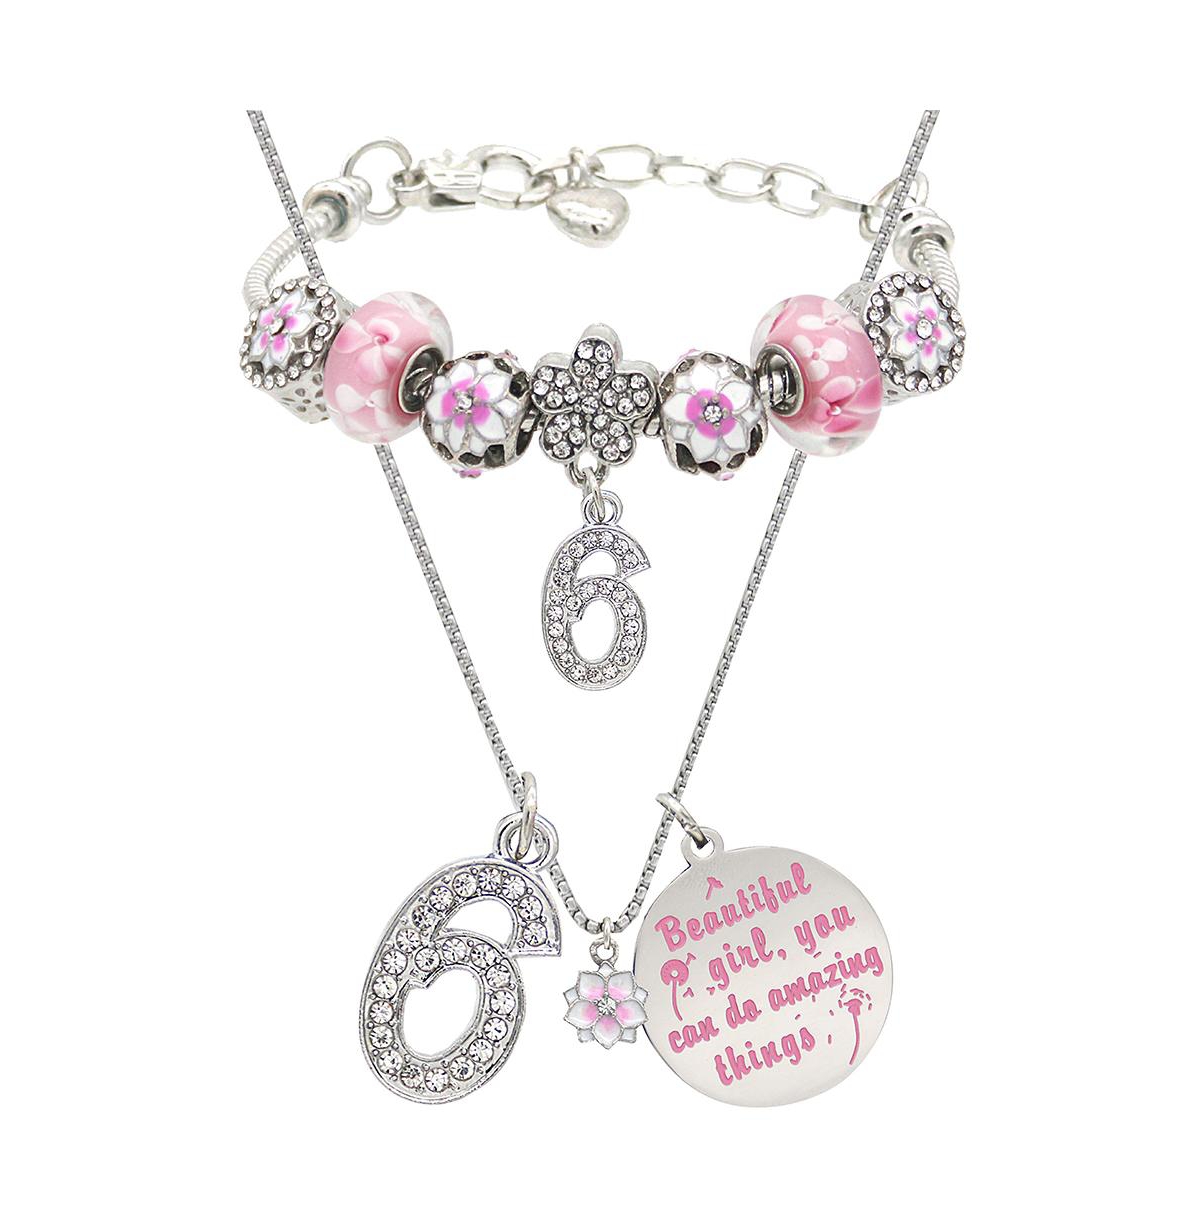 6th Birthday Gifts for Women: Elegant Bracelet and Necklace Set, Perfect for Birthday Celebrations and Decorations, Ideal Present for Her Special Day